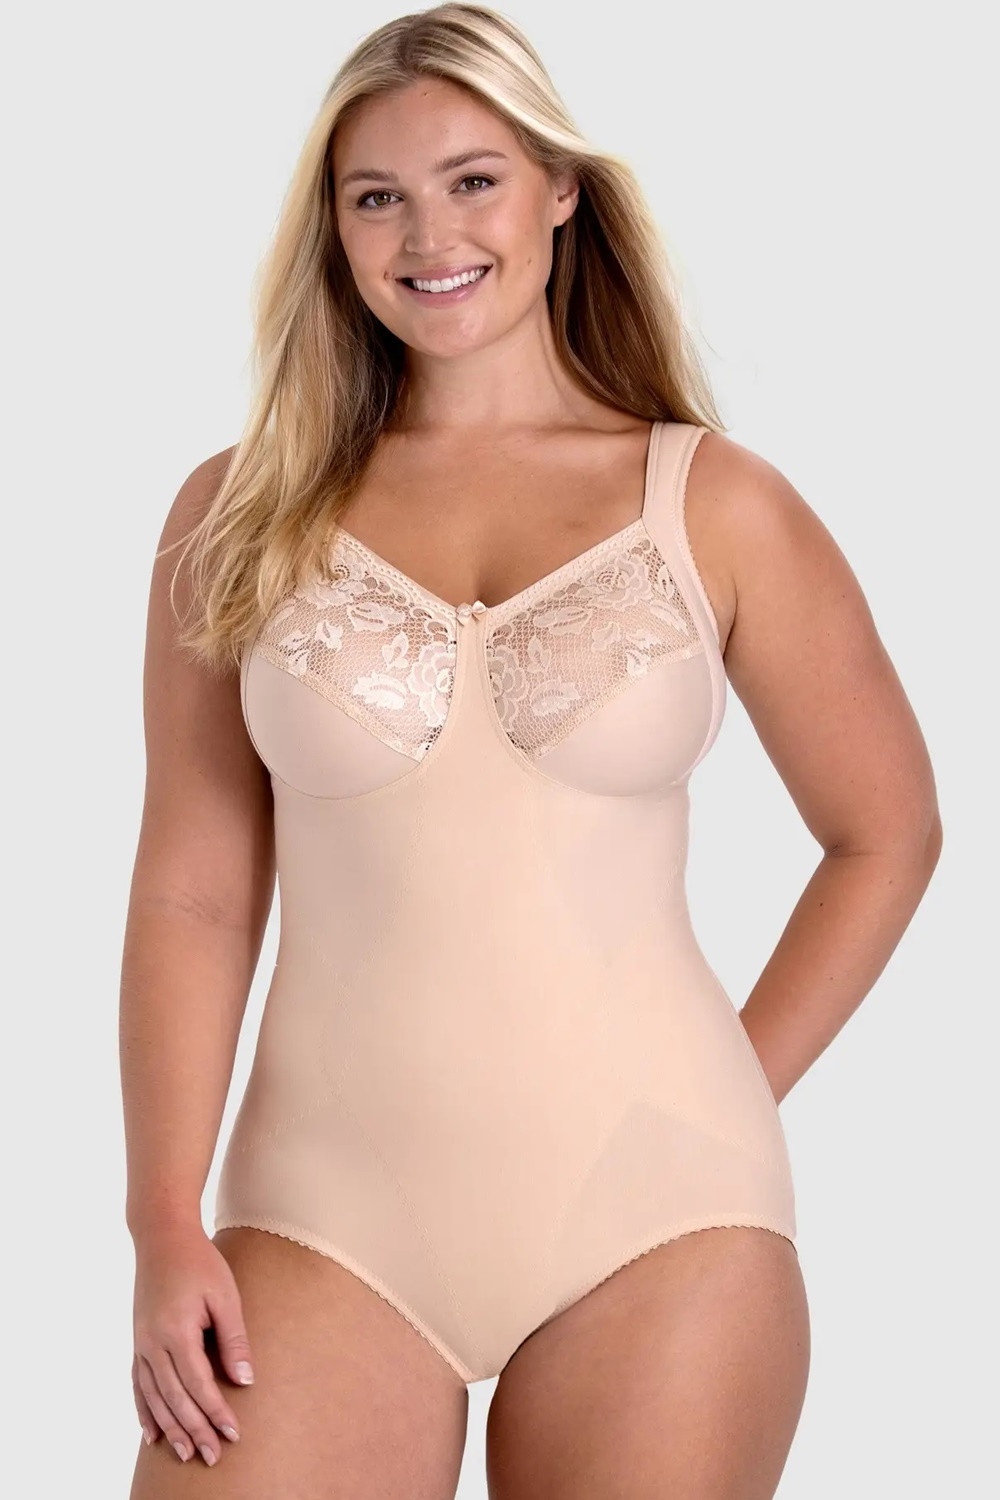 Soft cup non-wired body shaper with lace